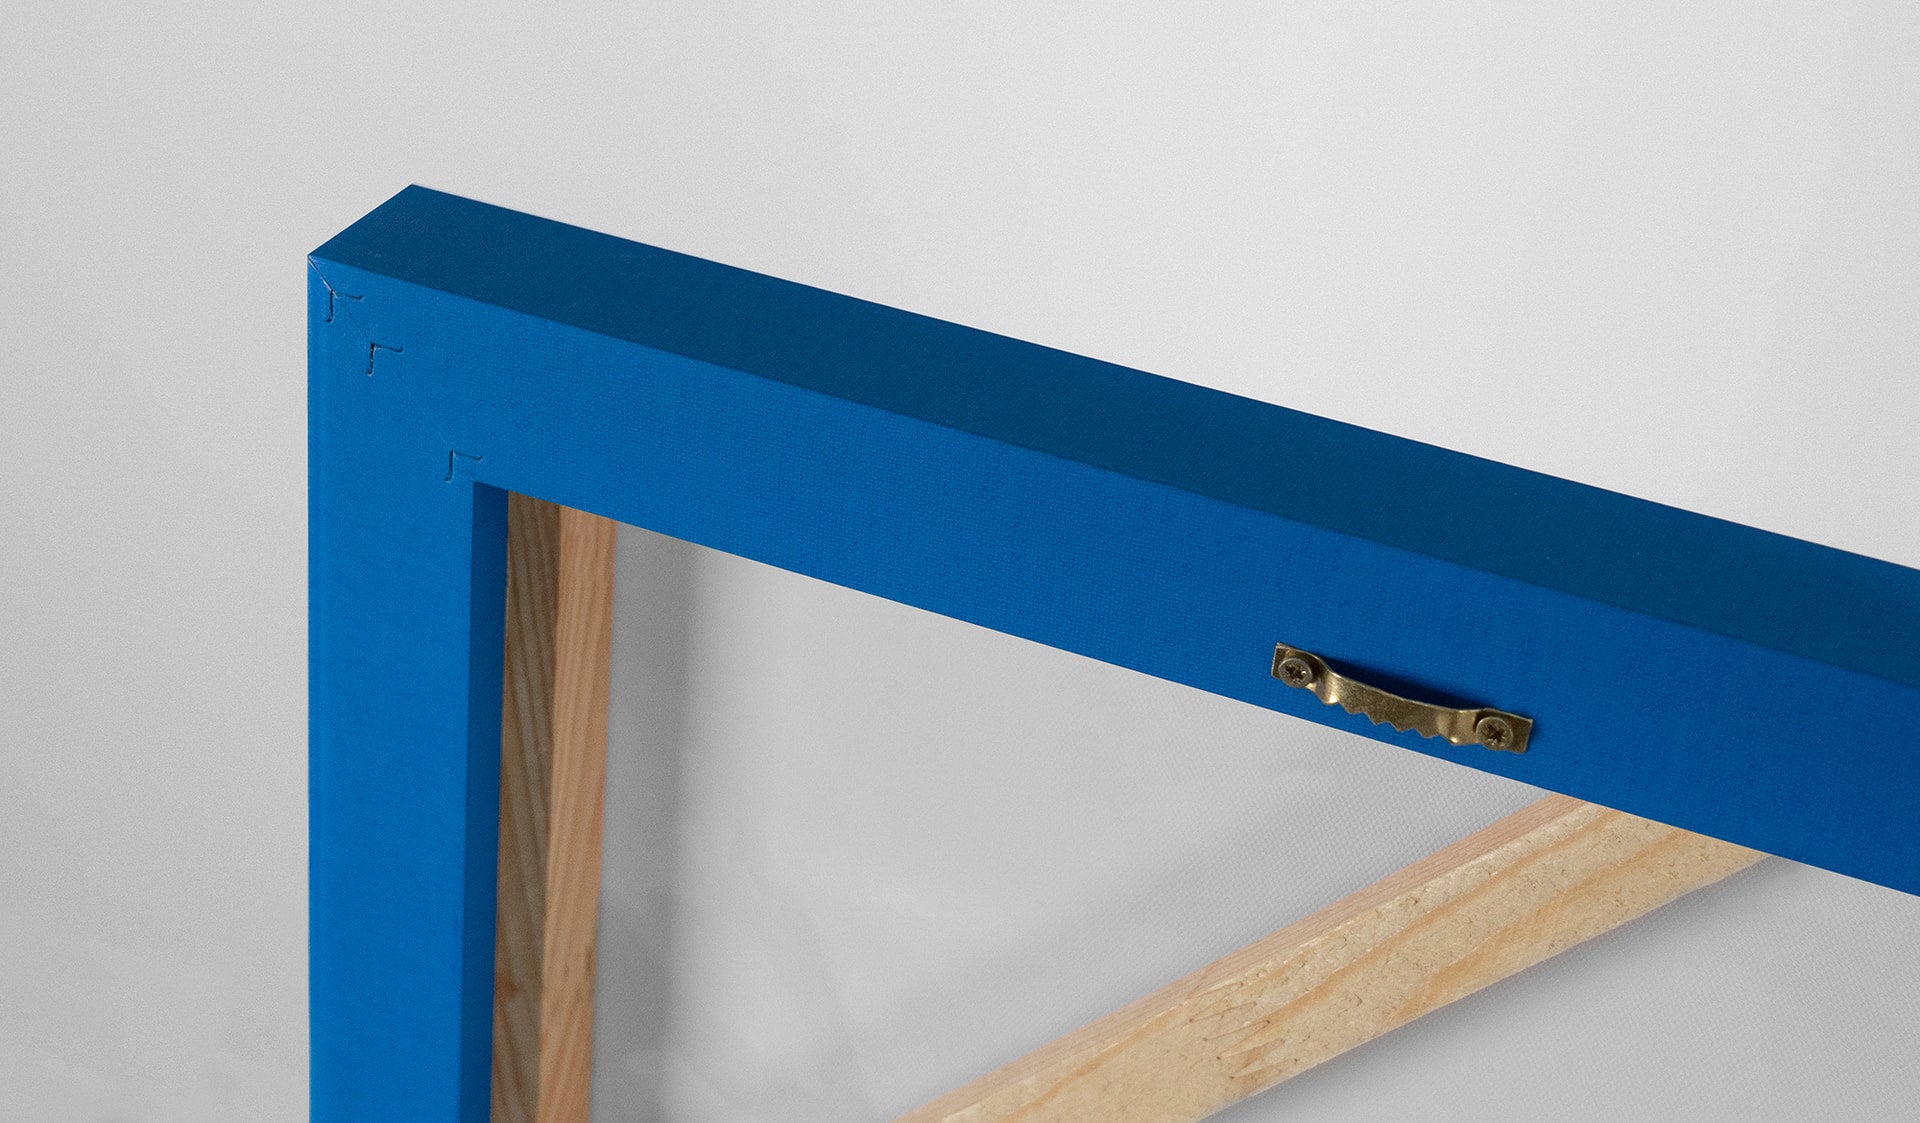 painting with a blue frame with a conveniet hanger